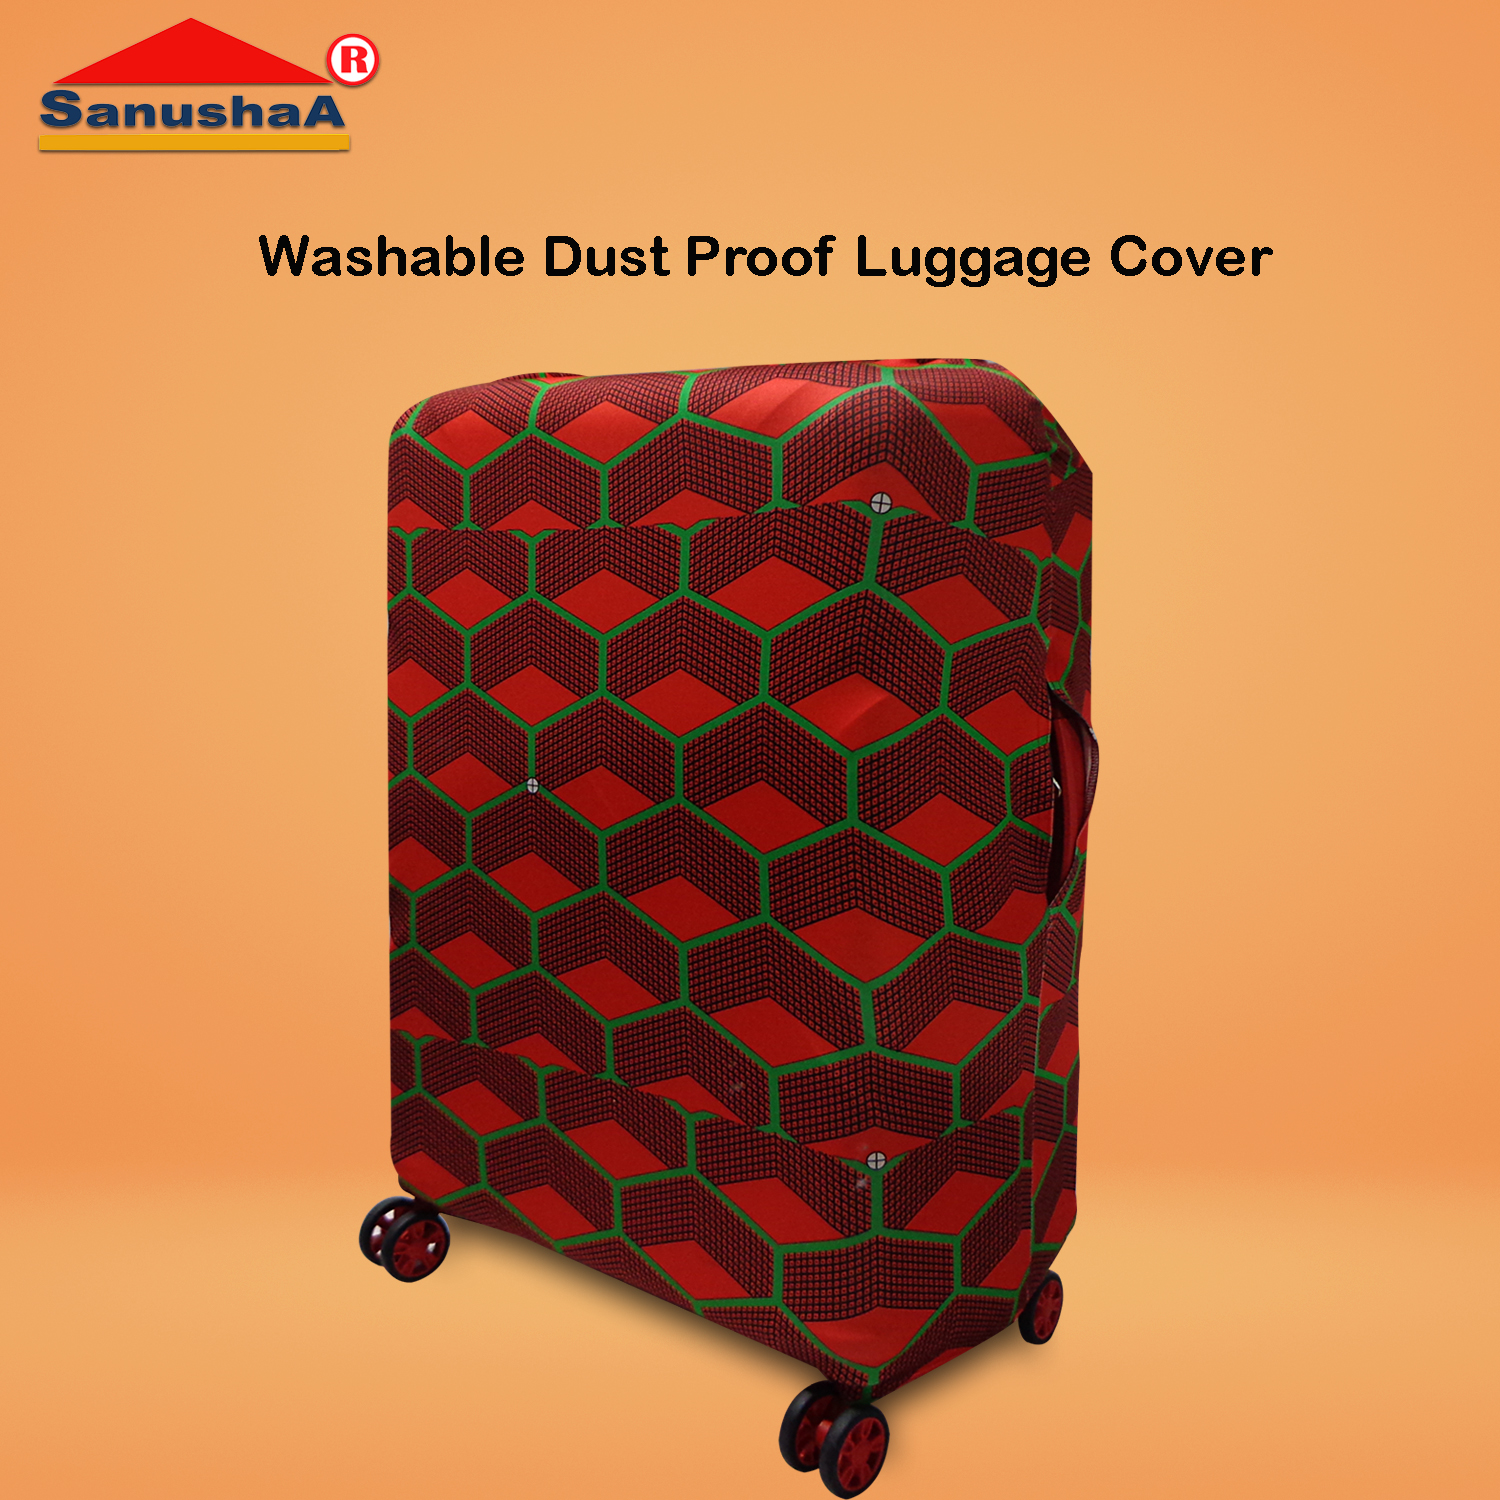 SANUSHAA Luggage Cover 65 cm (Multi), Book online order or what's up 8826891304